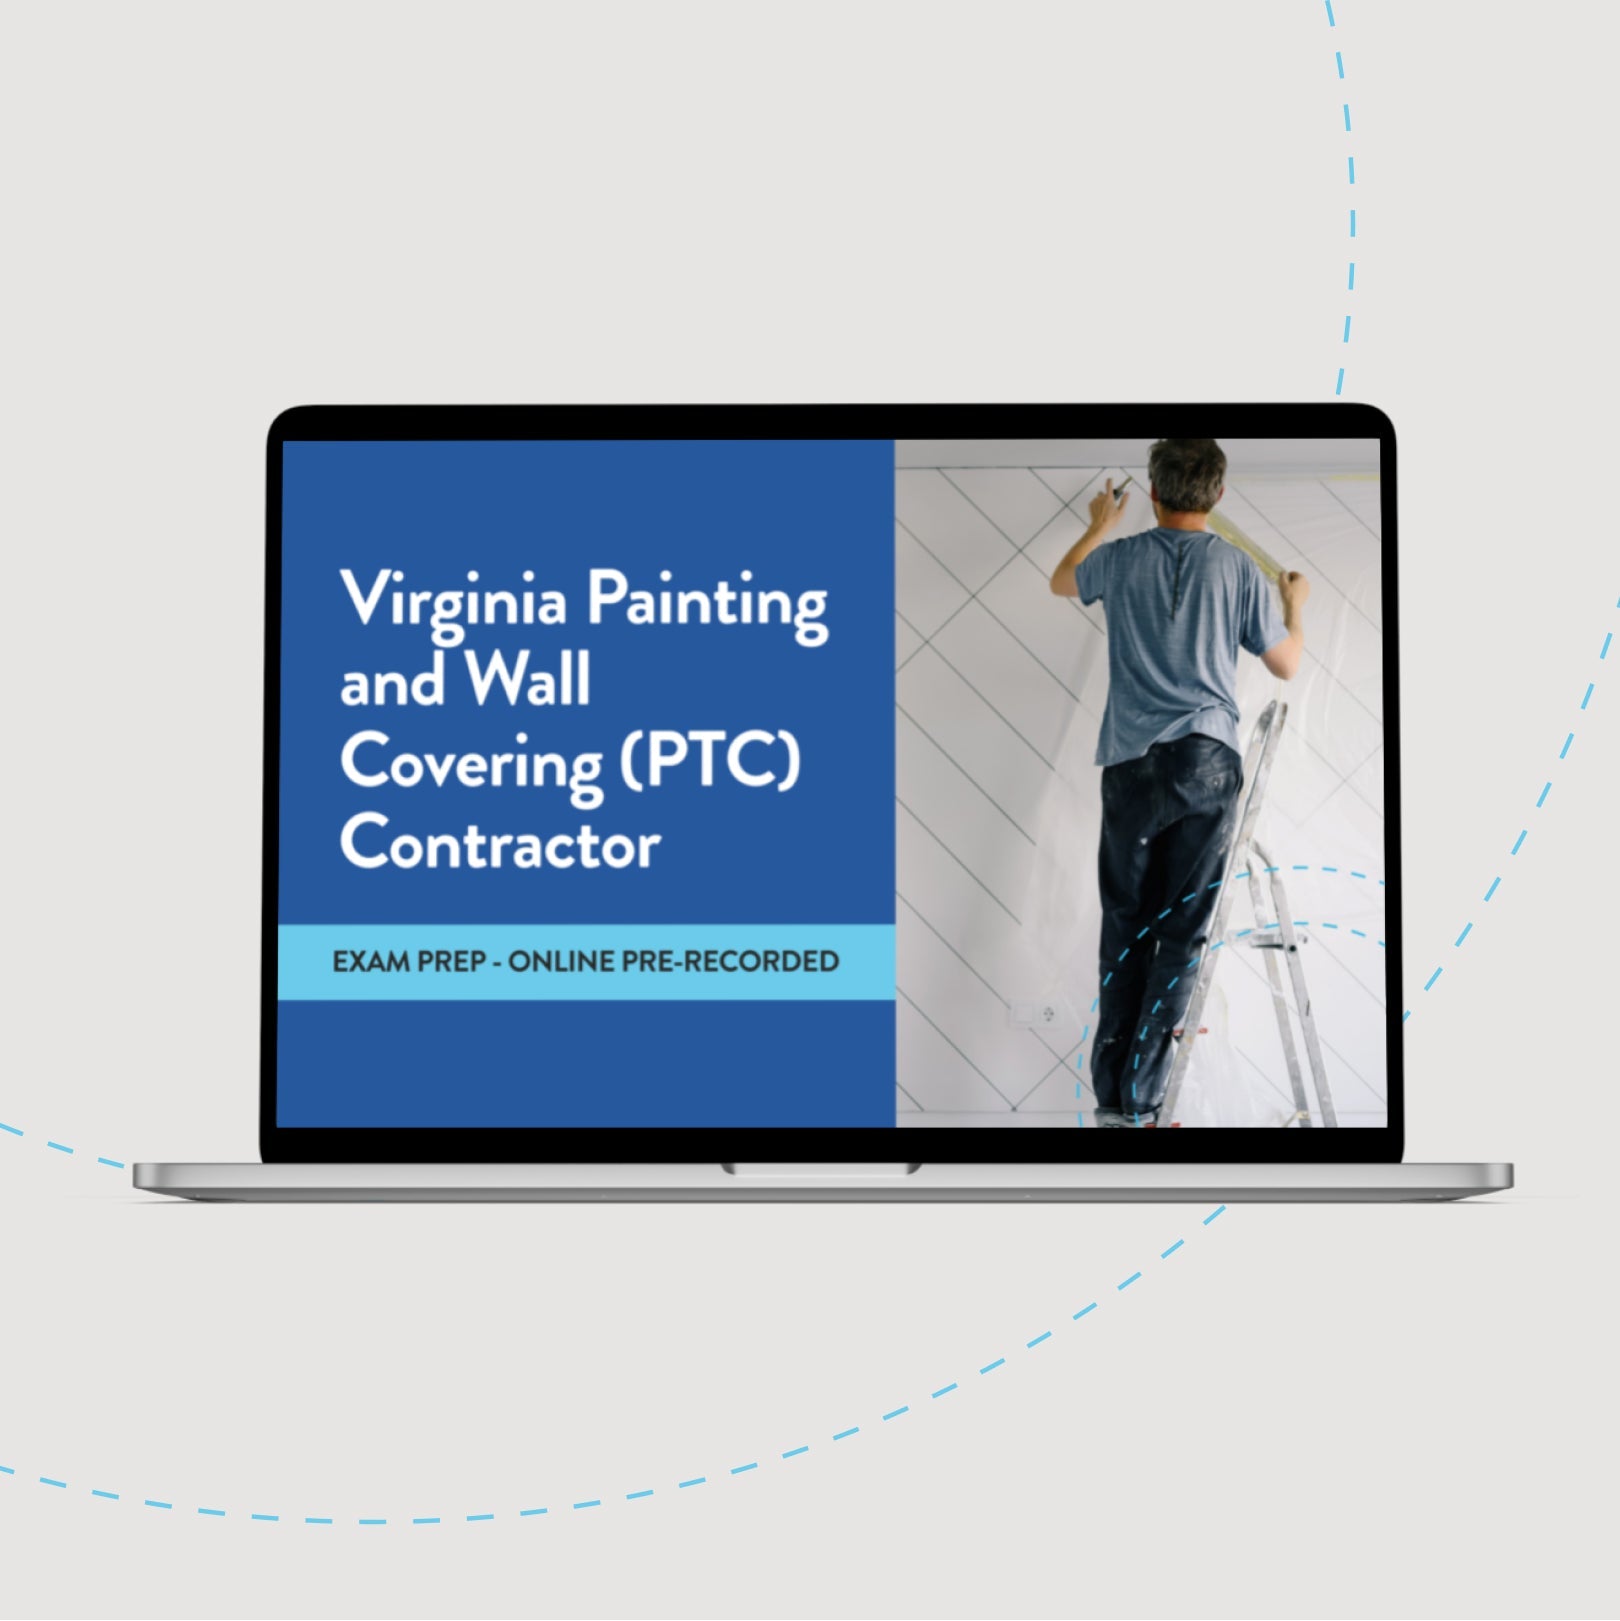 Virginia Painting and Wall Covering (PTC) Contractor Exam Prep Course